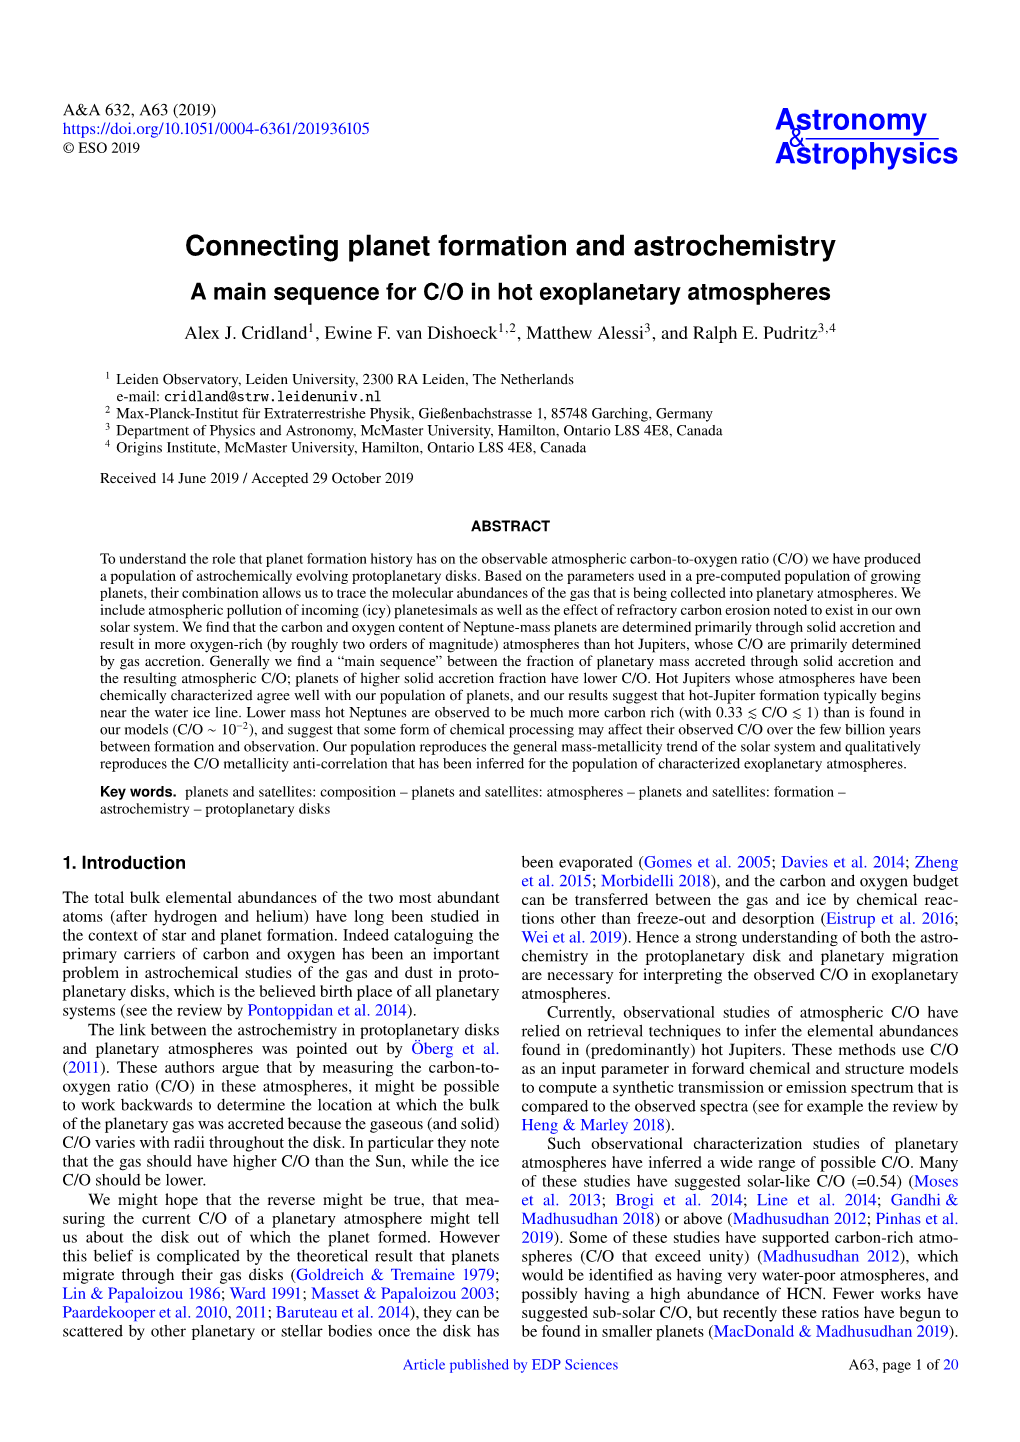 Connecting Planet Formation and Astrochemistry a Main Sequence for C/O in Hot Exoplanetary Atmospheres Alex J